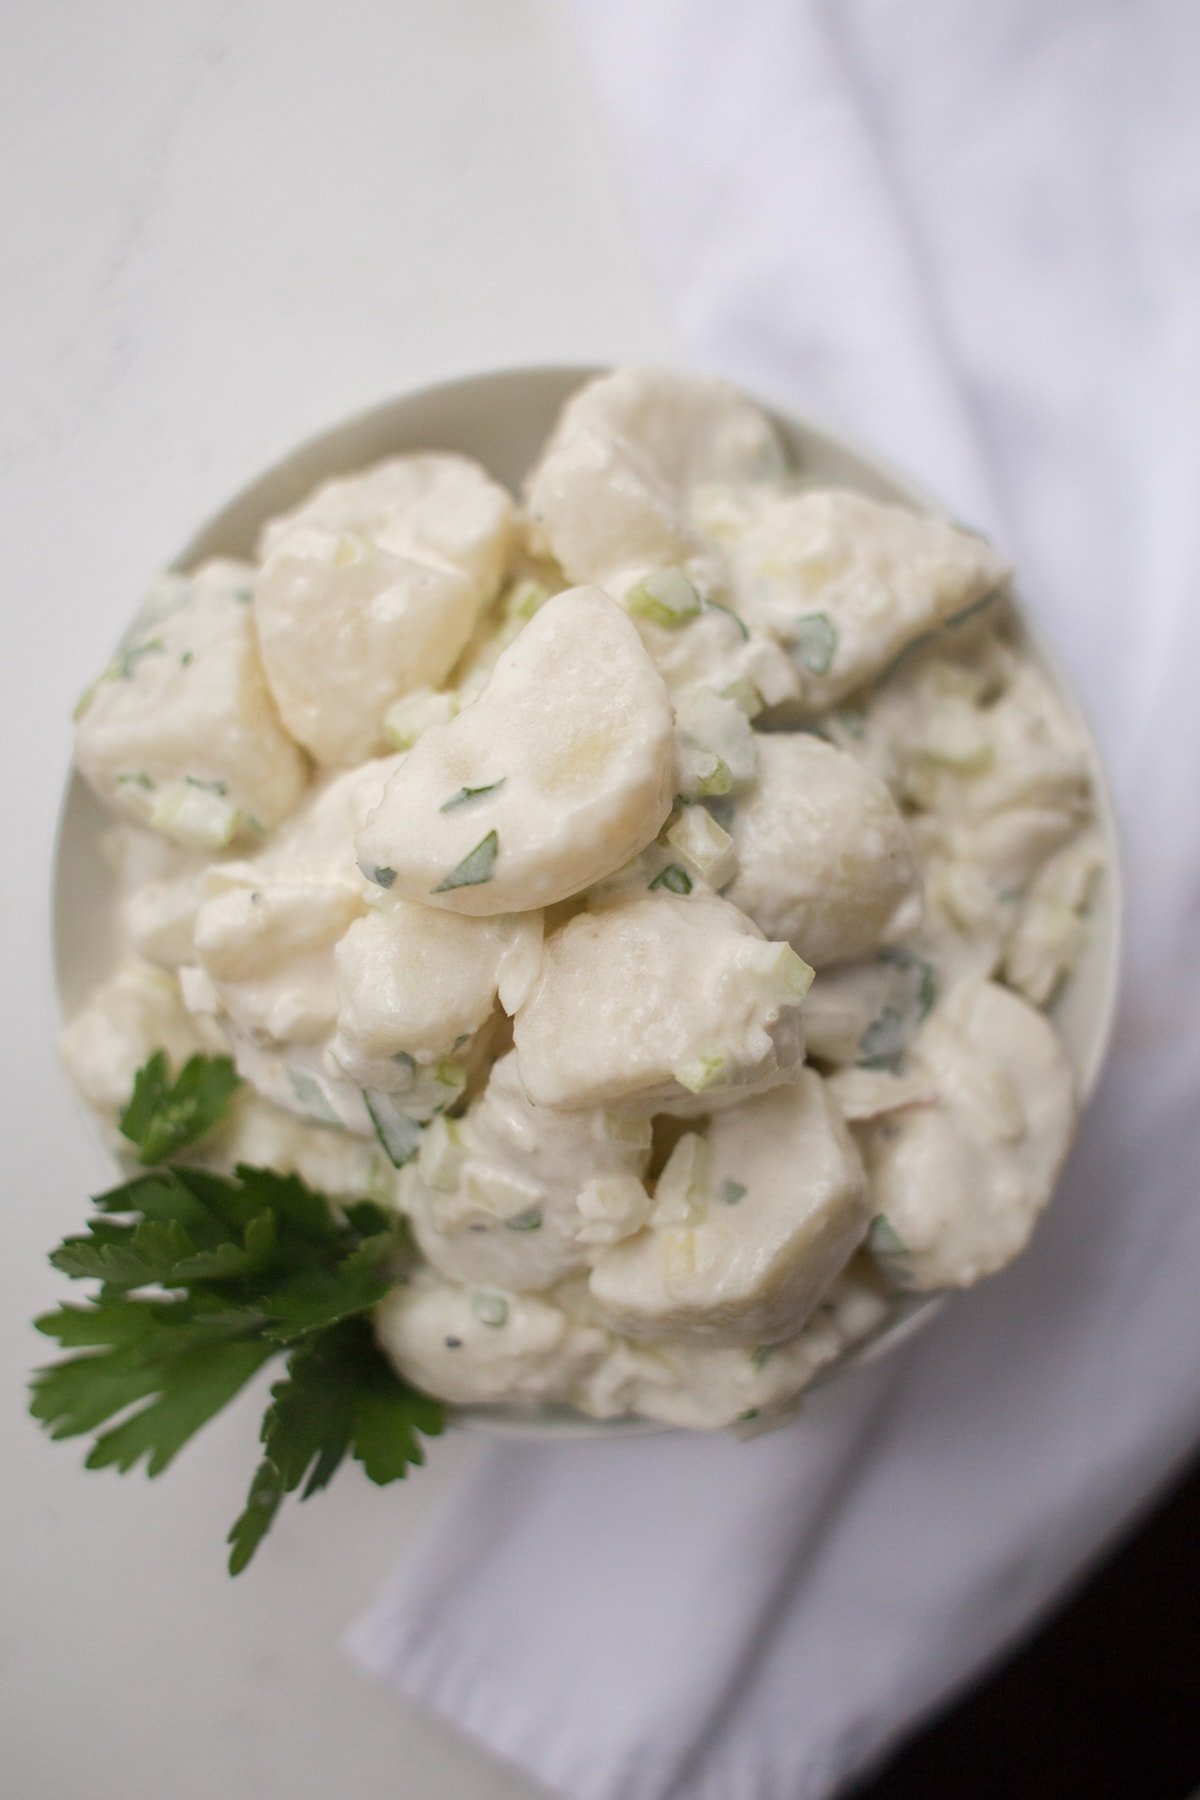 Top down view of the potato salad recipe in a white bowl